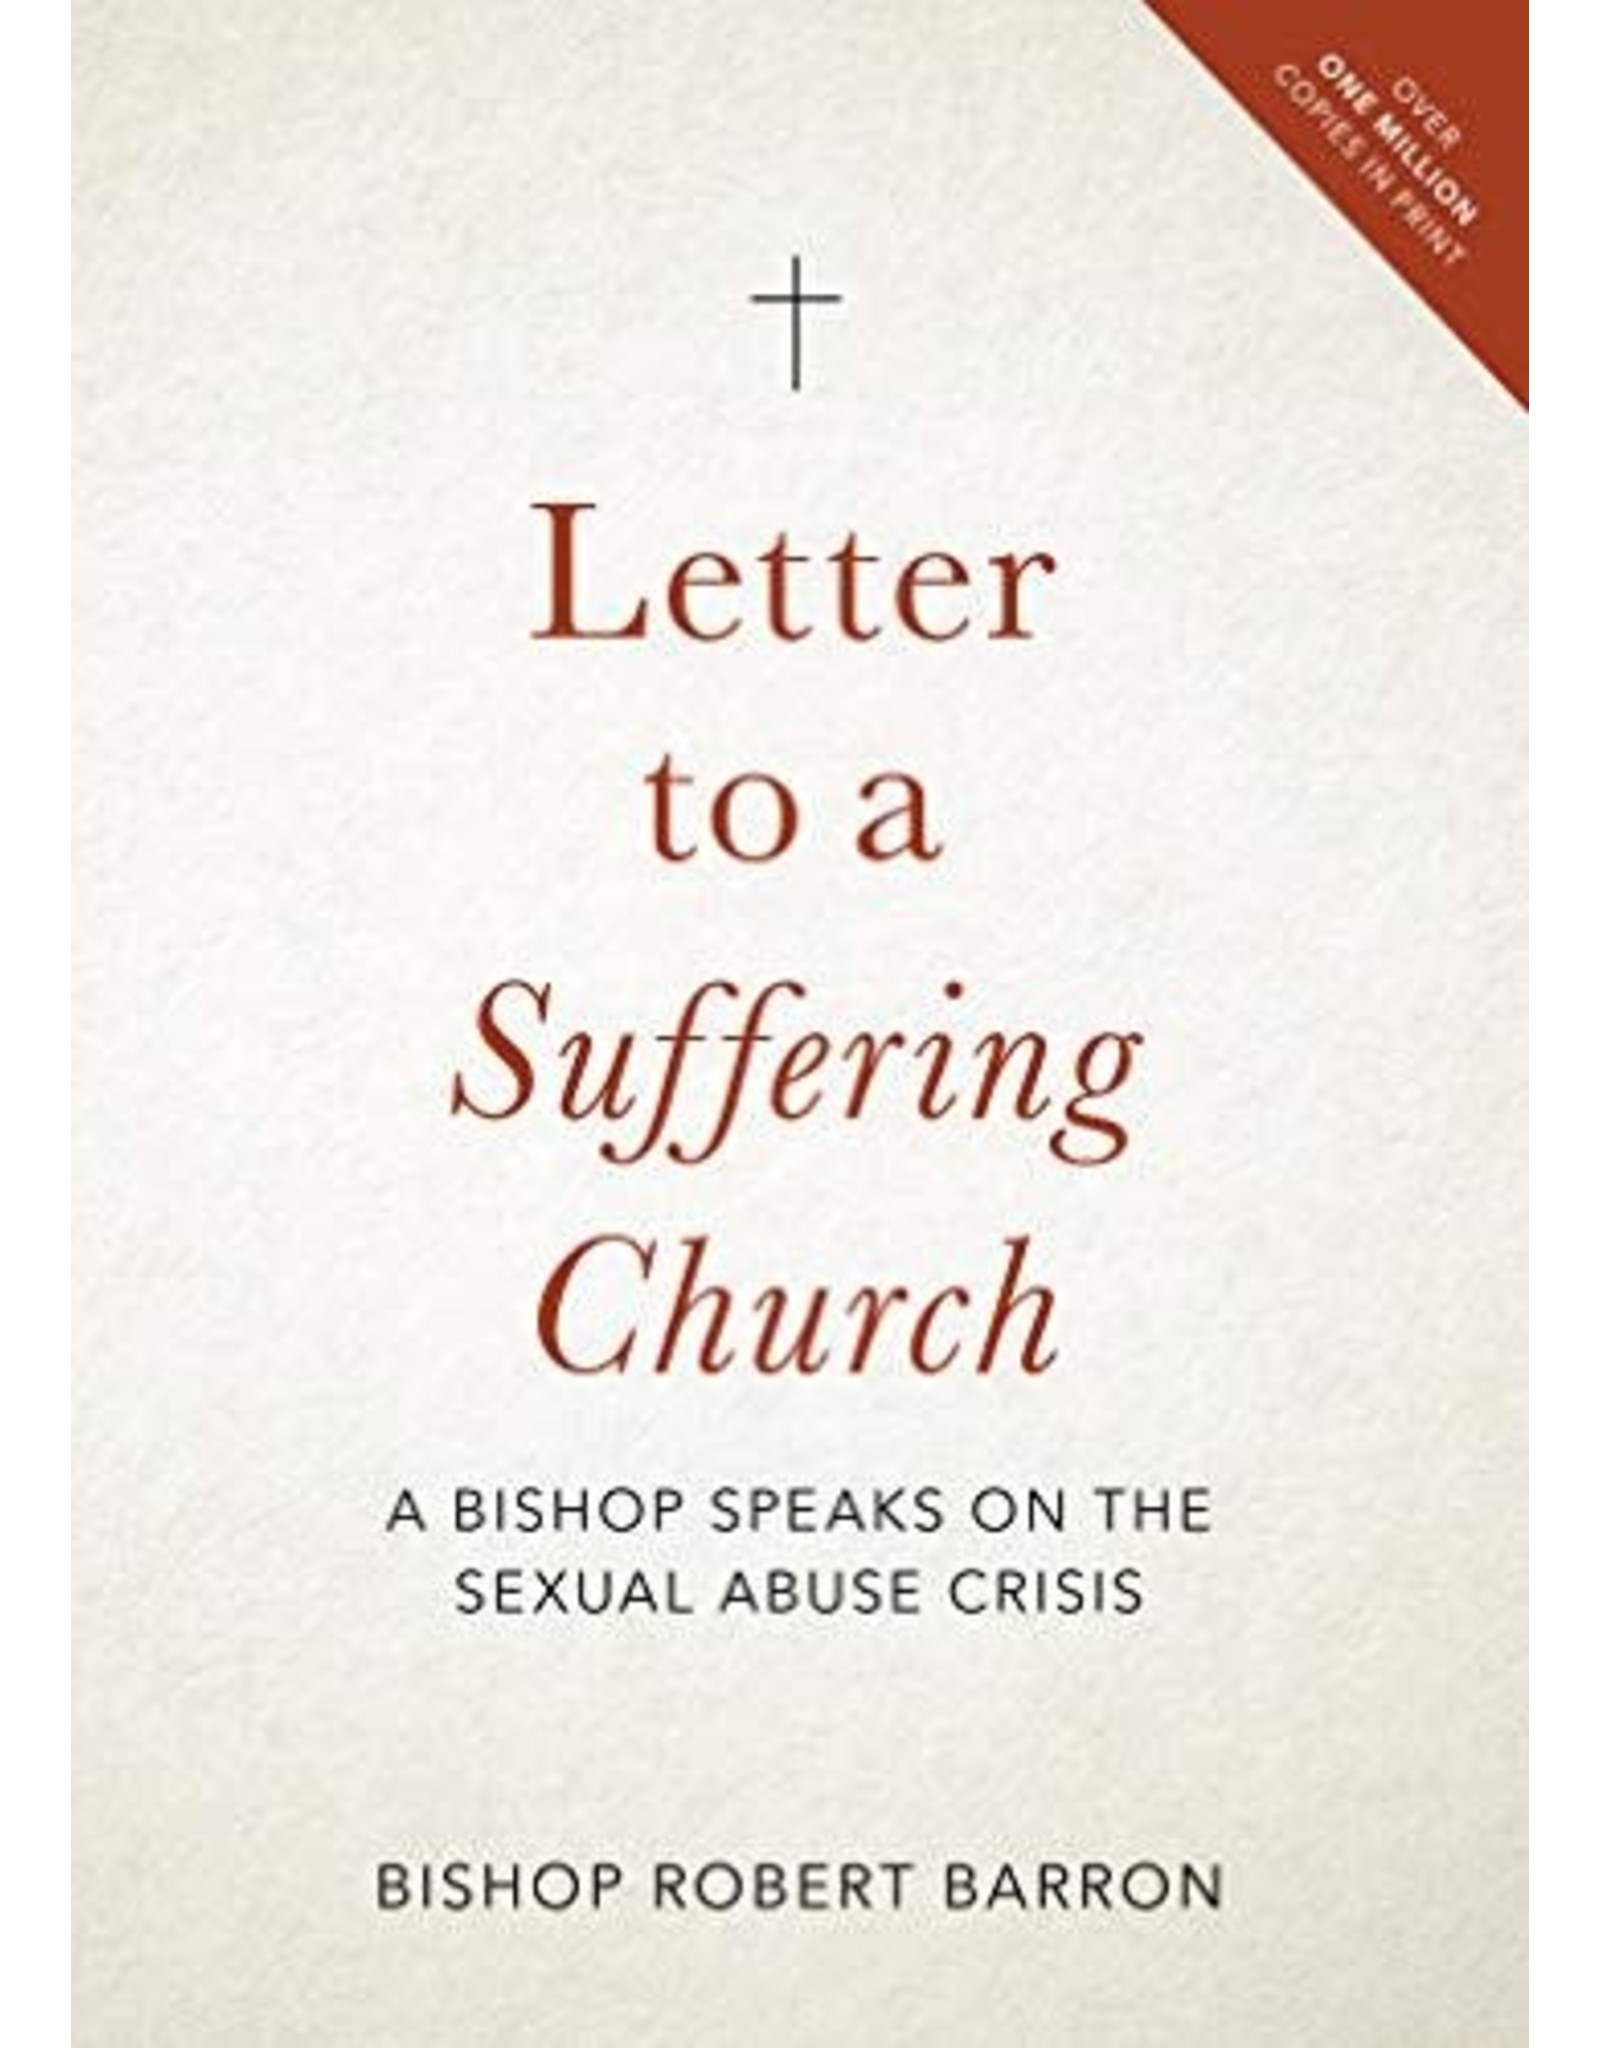 Letter to a Suffering Church: A Bishop Speaks on the Sexual Abuse Crisis by Robert Barron (Paperback)